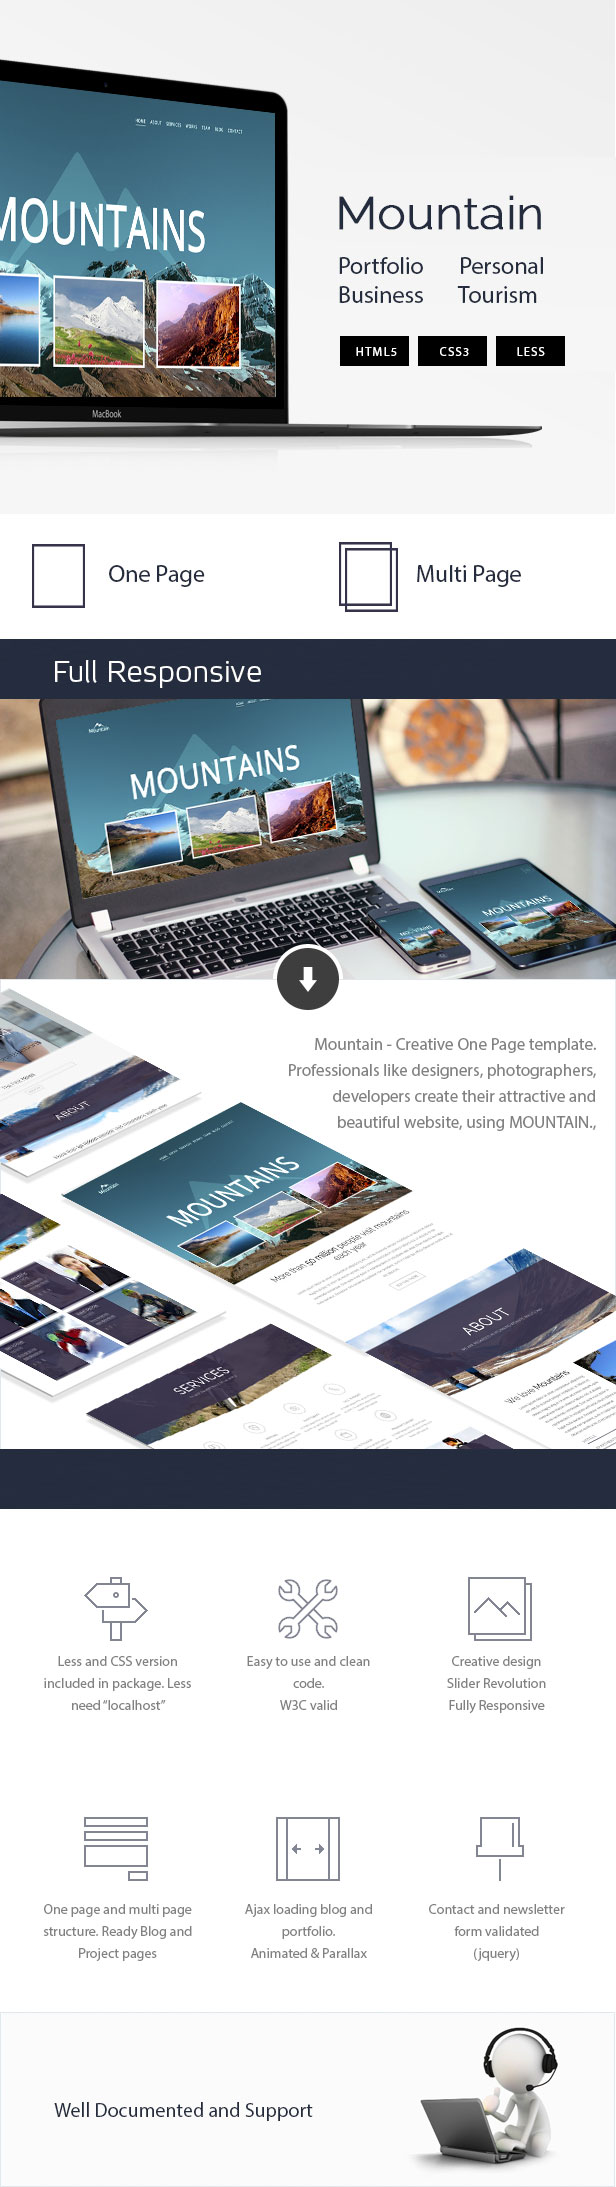 Mountain - Creative OnePage & MultiPage Template - 1